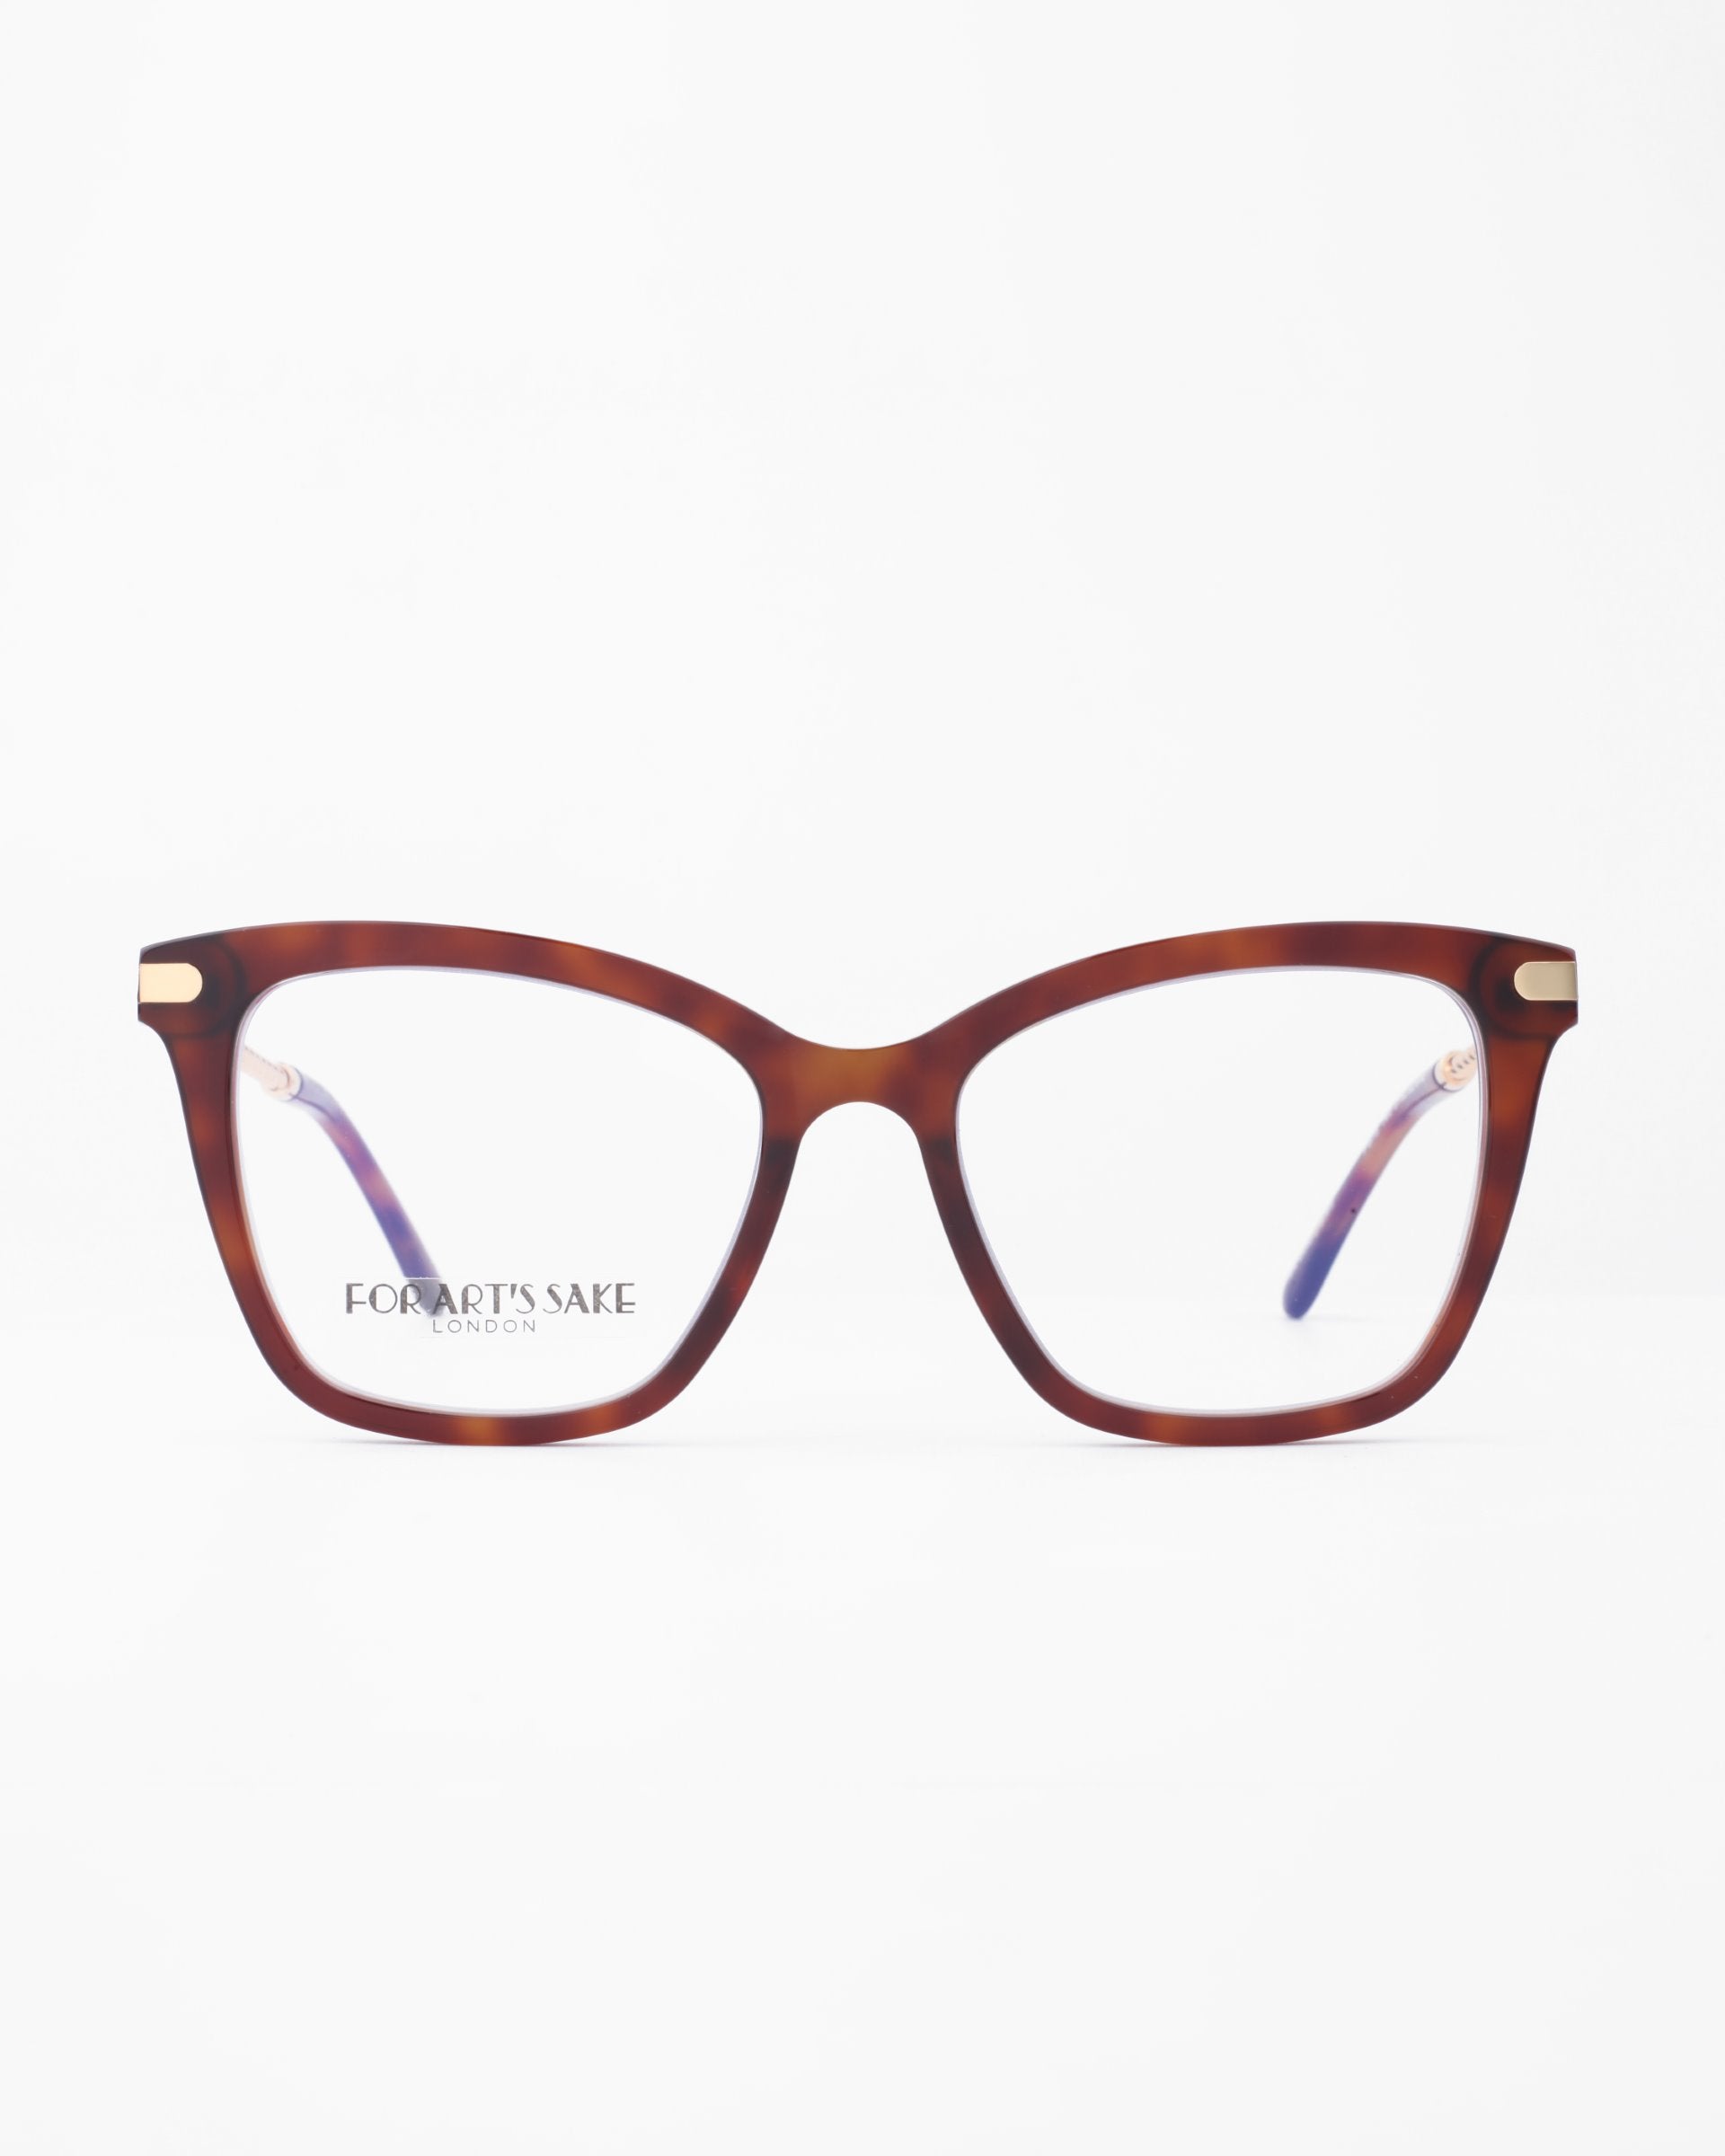 A pair of stylish, tortoiseshell pattern eyeglasses with a cat-eye shape. The frame features gold accents on the upper corners and the brand name "For Art's Sake®" is visible on one of the clear lenses. These chic Paris Two glasses also include a Blue Light Filter for added eye comfort. The background is white.